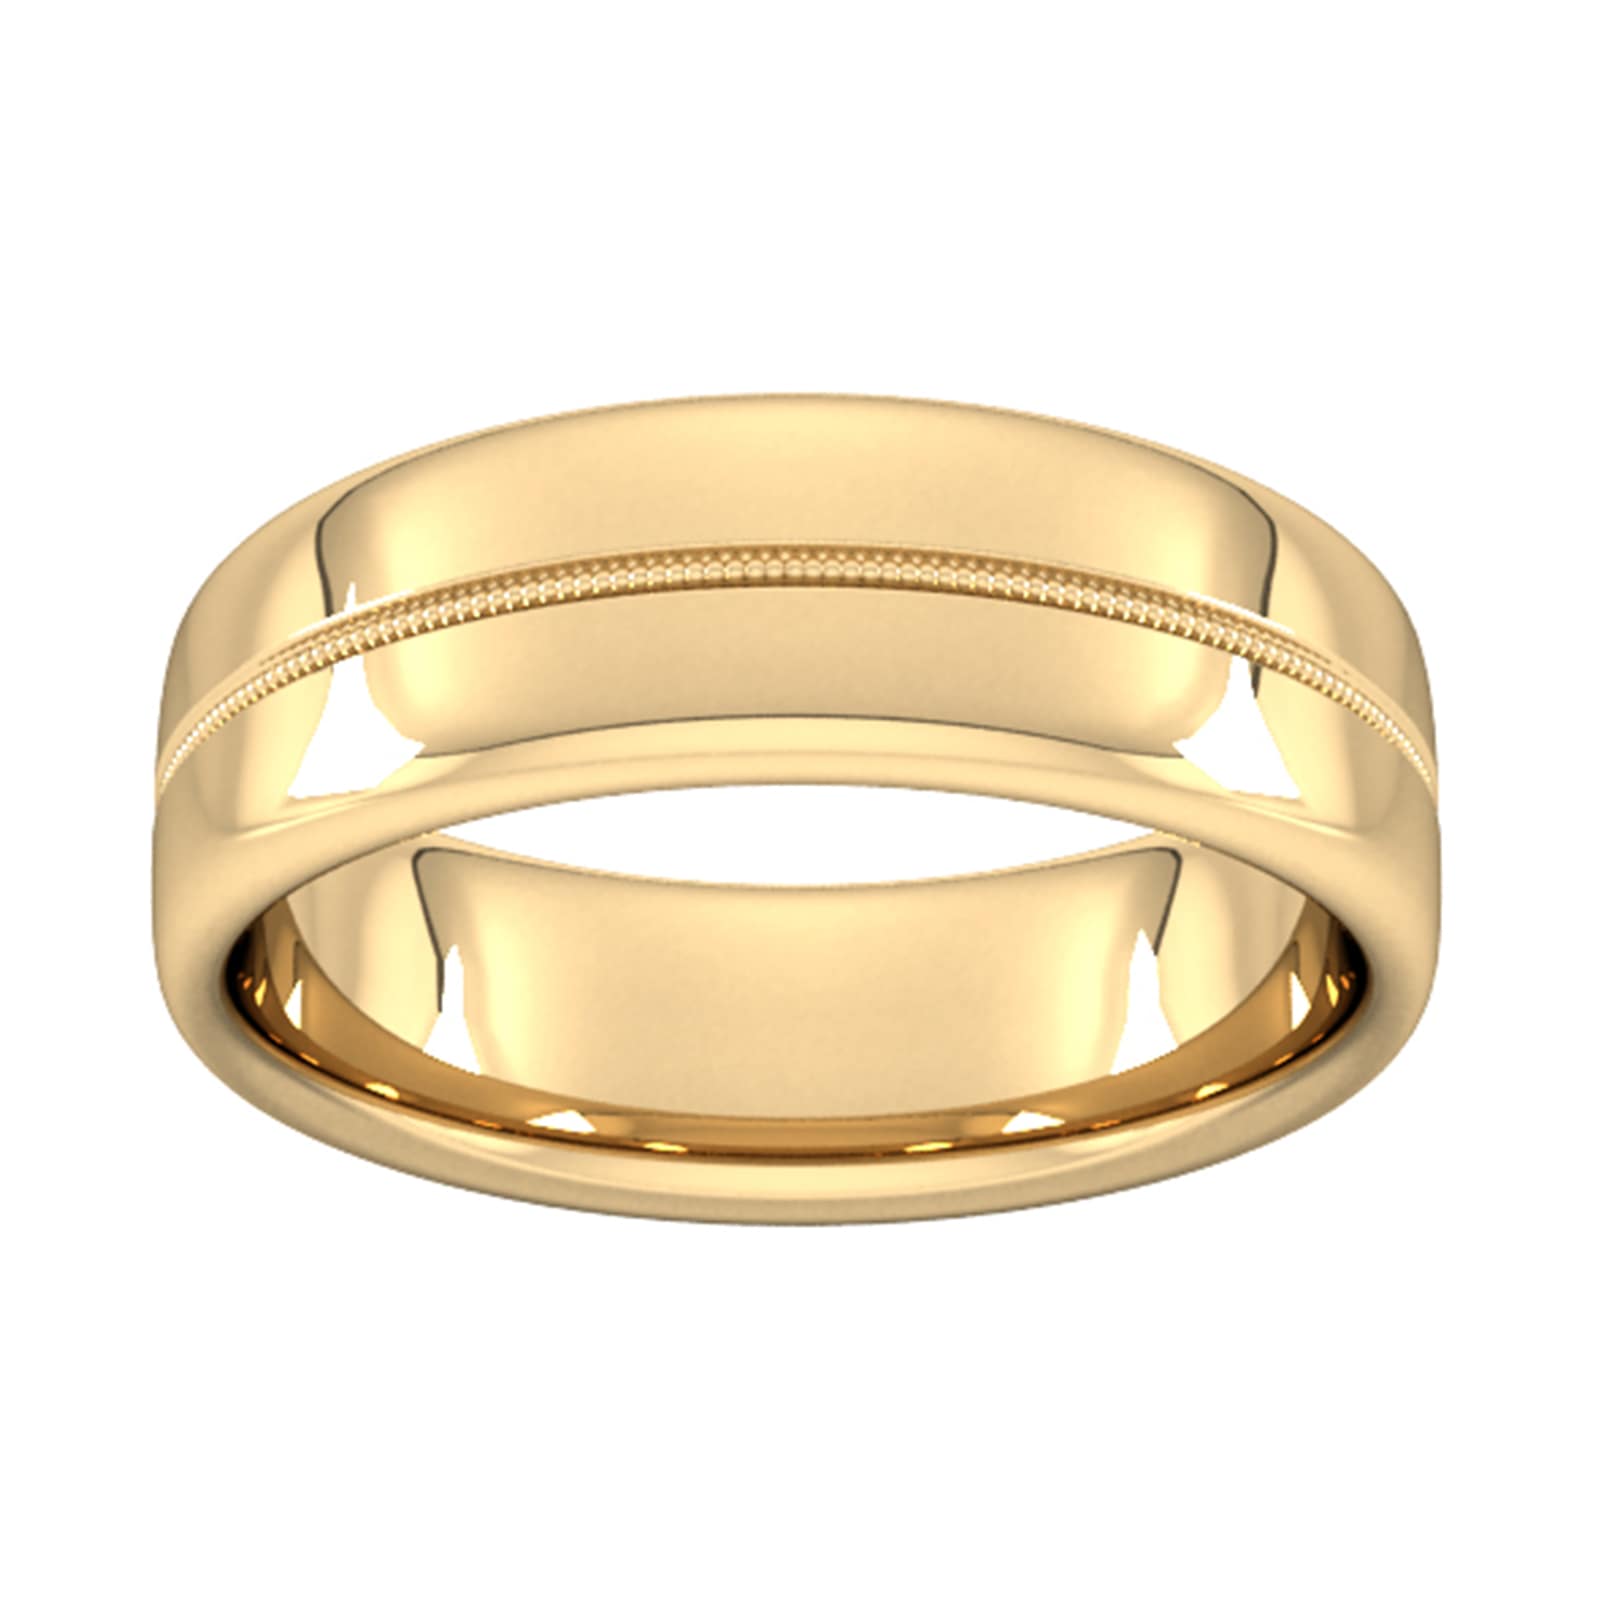 7mm Traditional Court Standard Milgrain Centre Wedding Ring In 18 Carat Yellow Gold - Ring Size Q